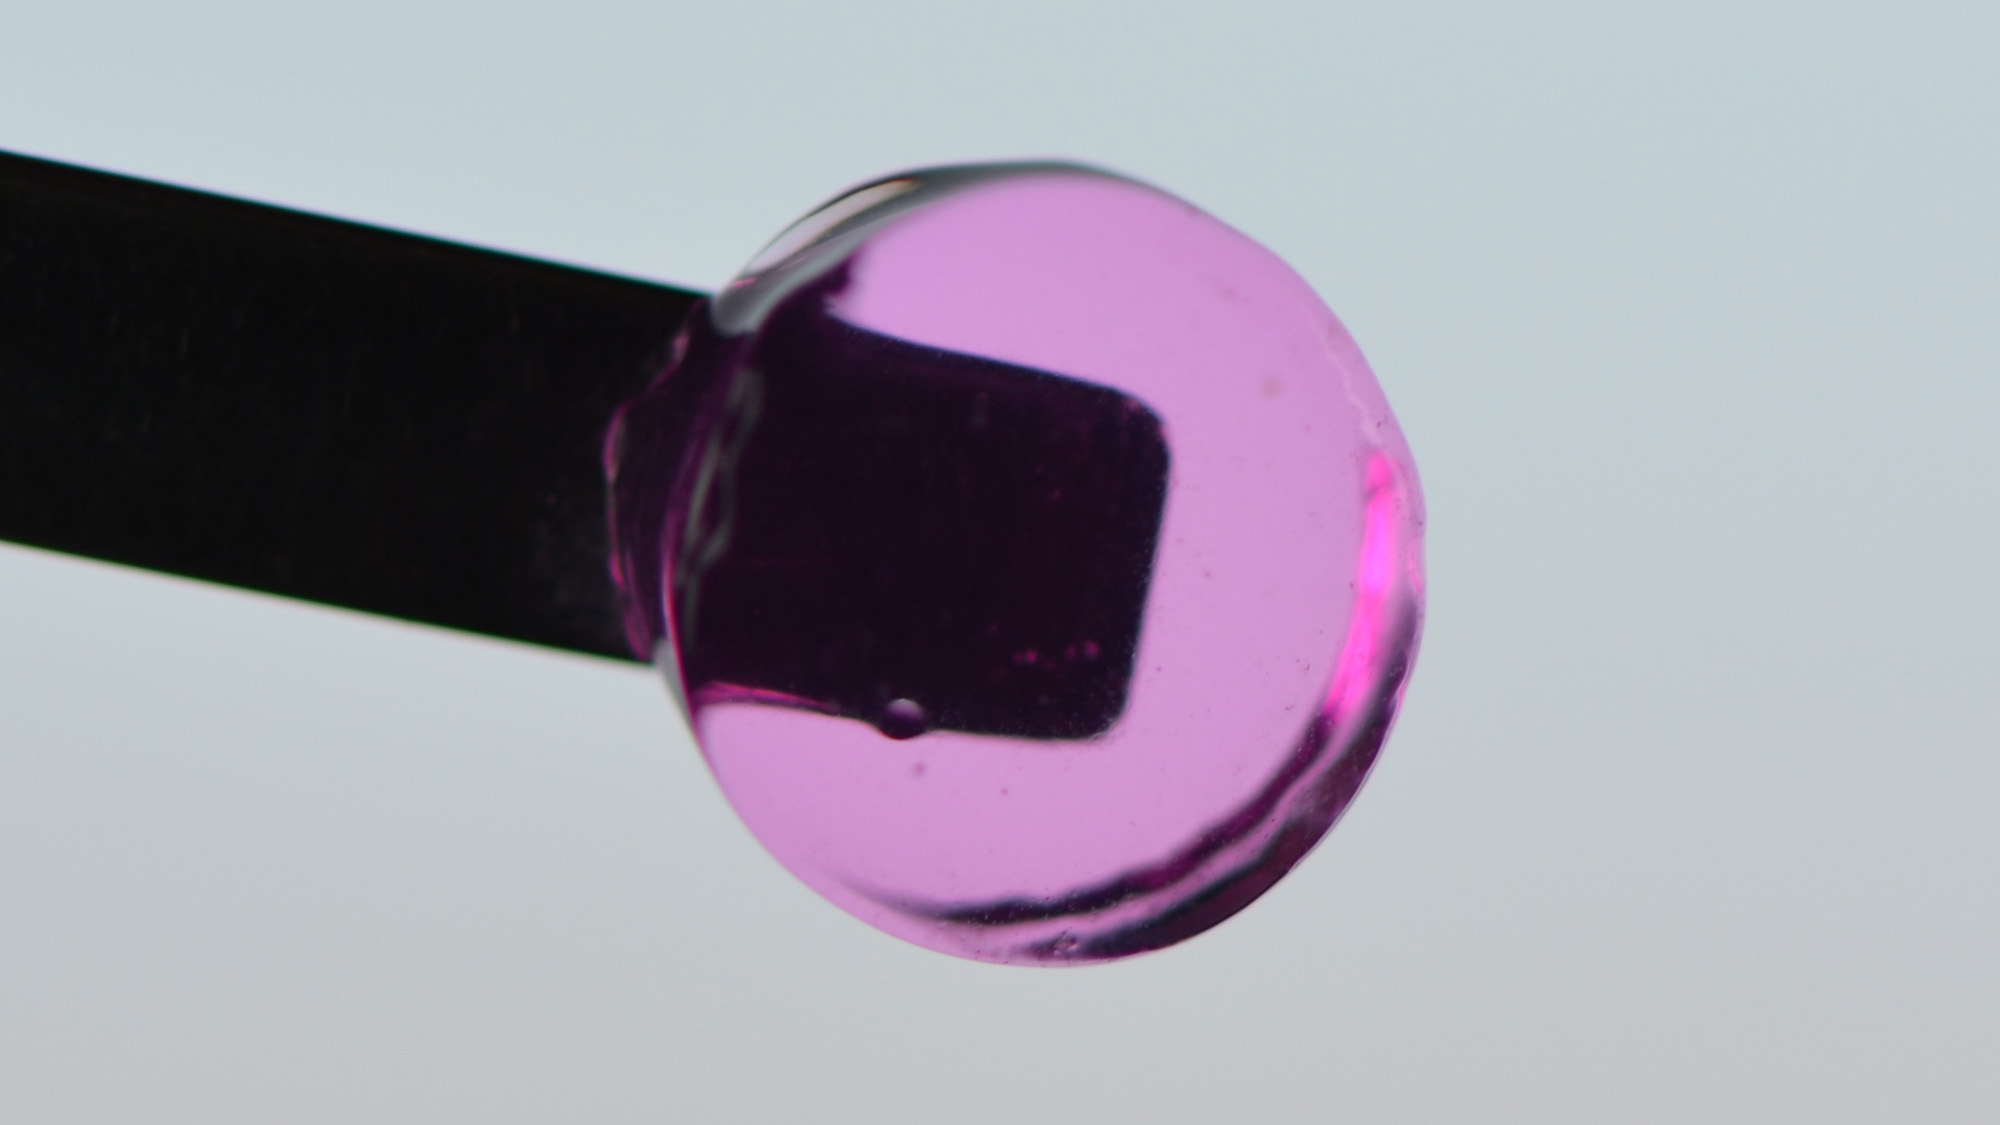 Close-up of the hydrogel